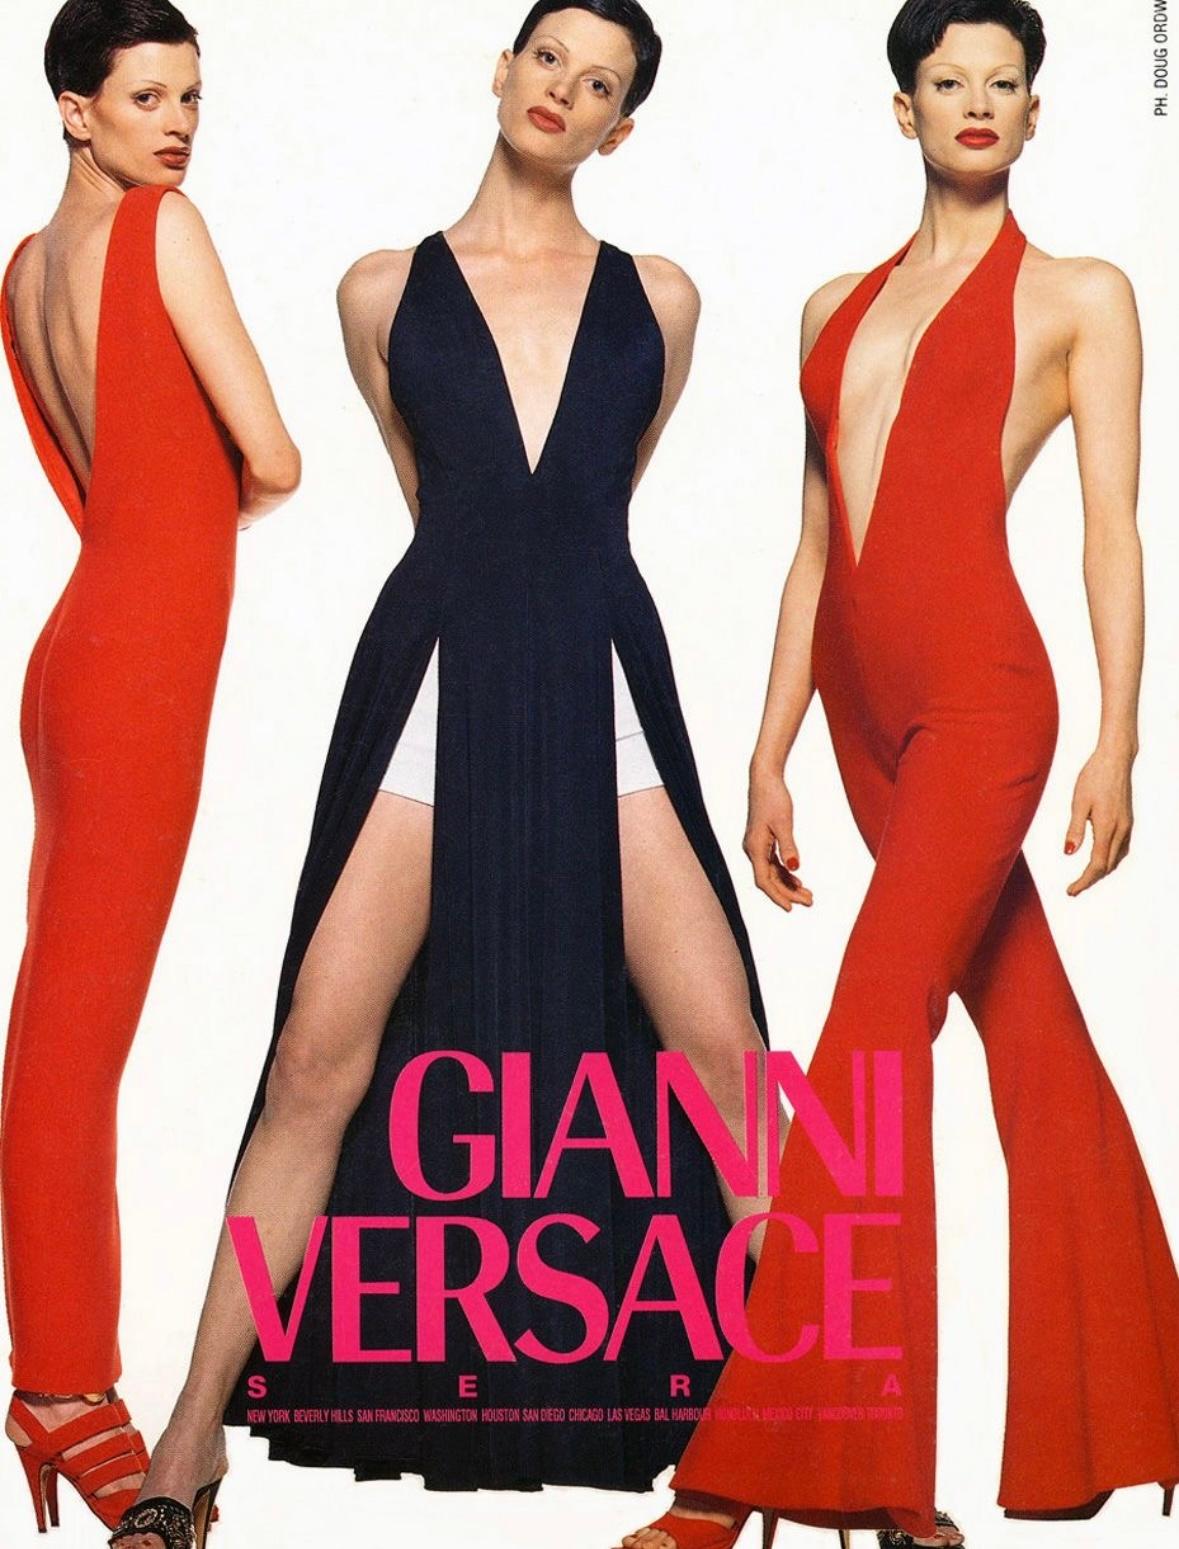 S/S 1993 Gianni Versace Runway Ad Red Plunging Back Sleeveless Dress For Sale 1